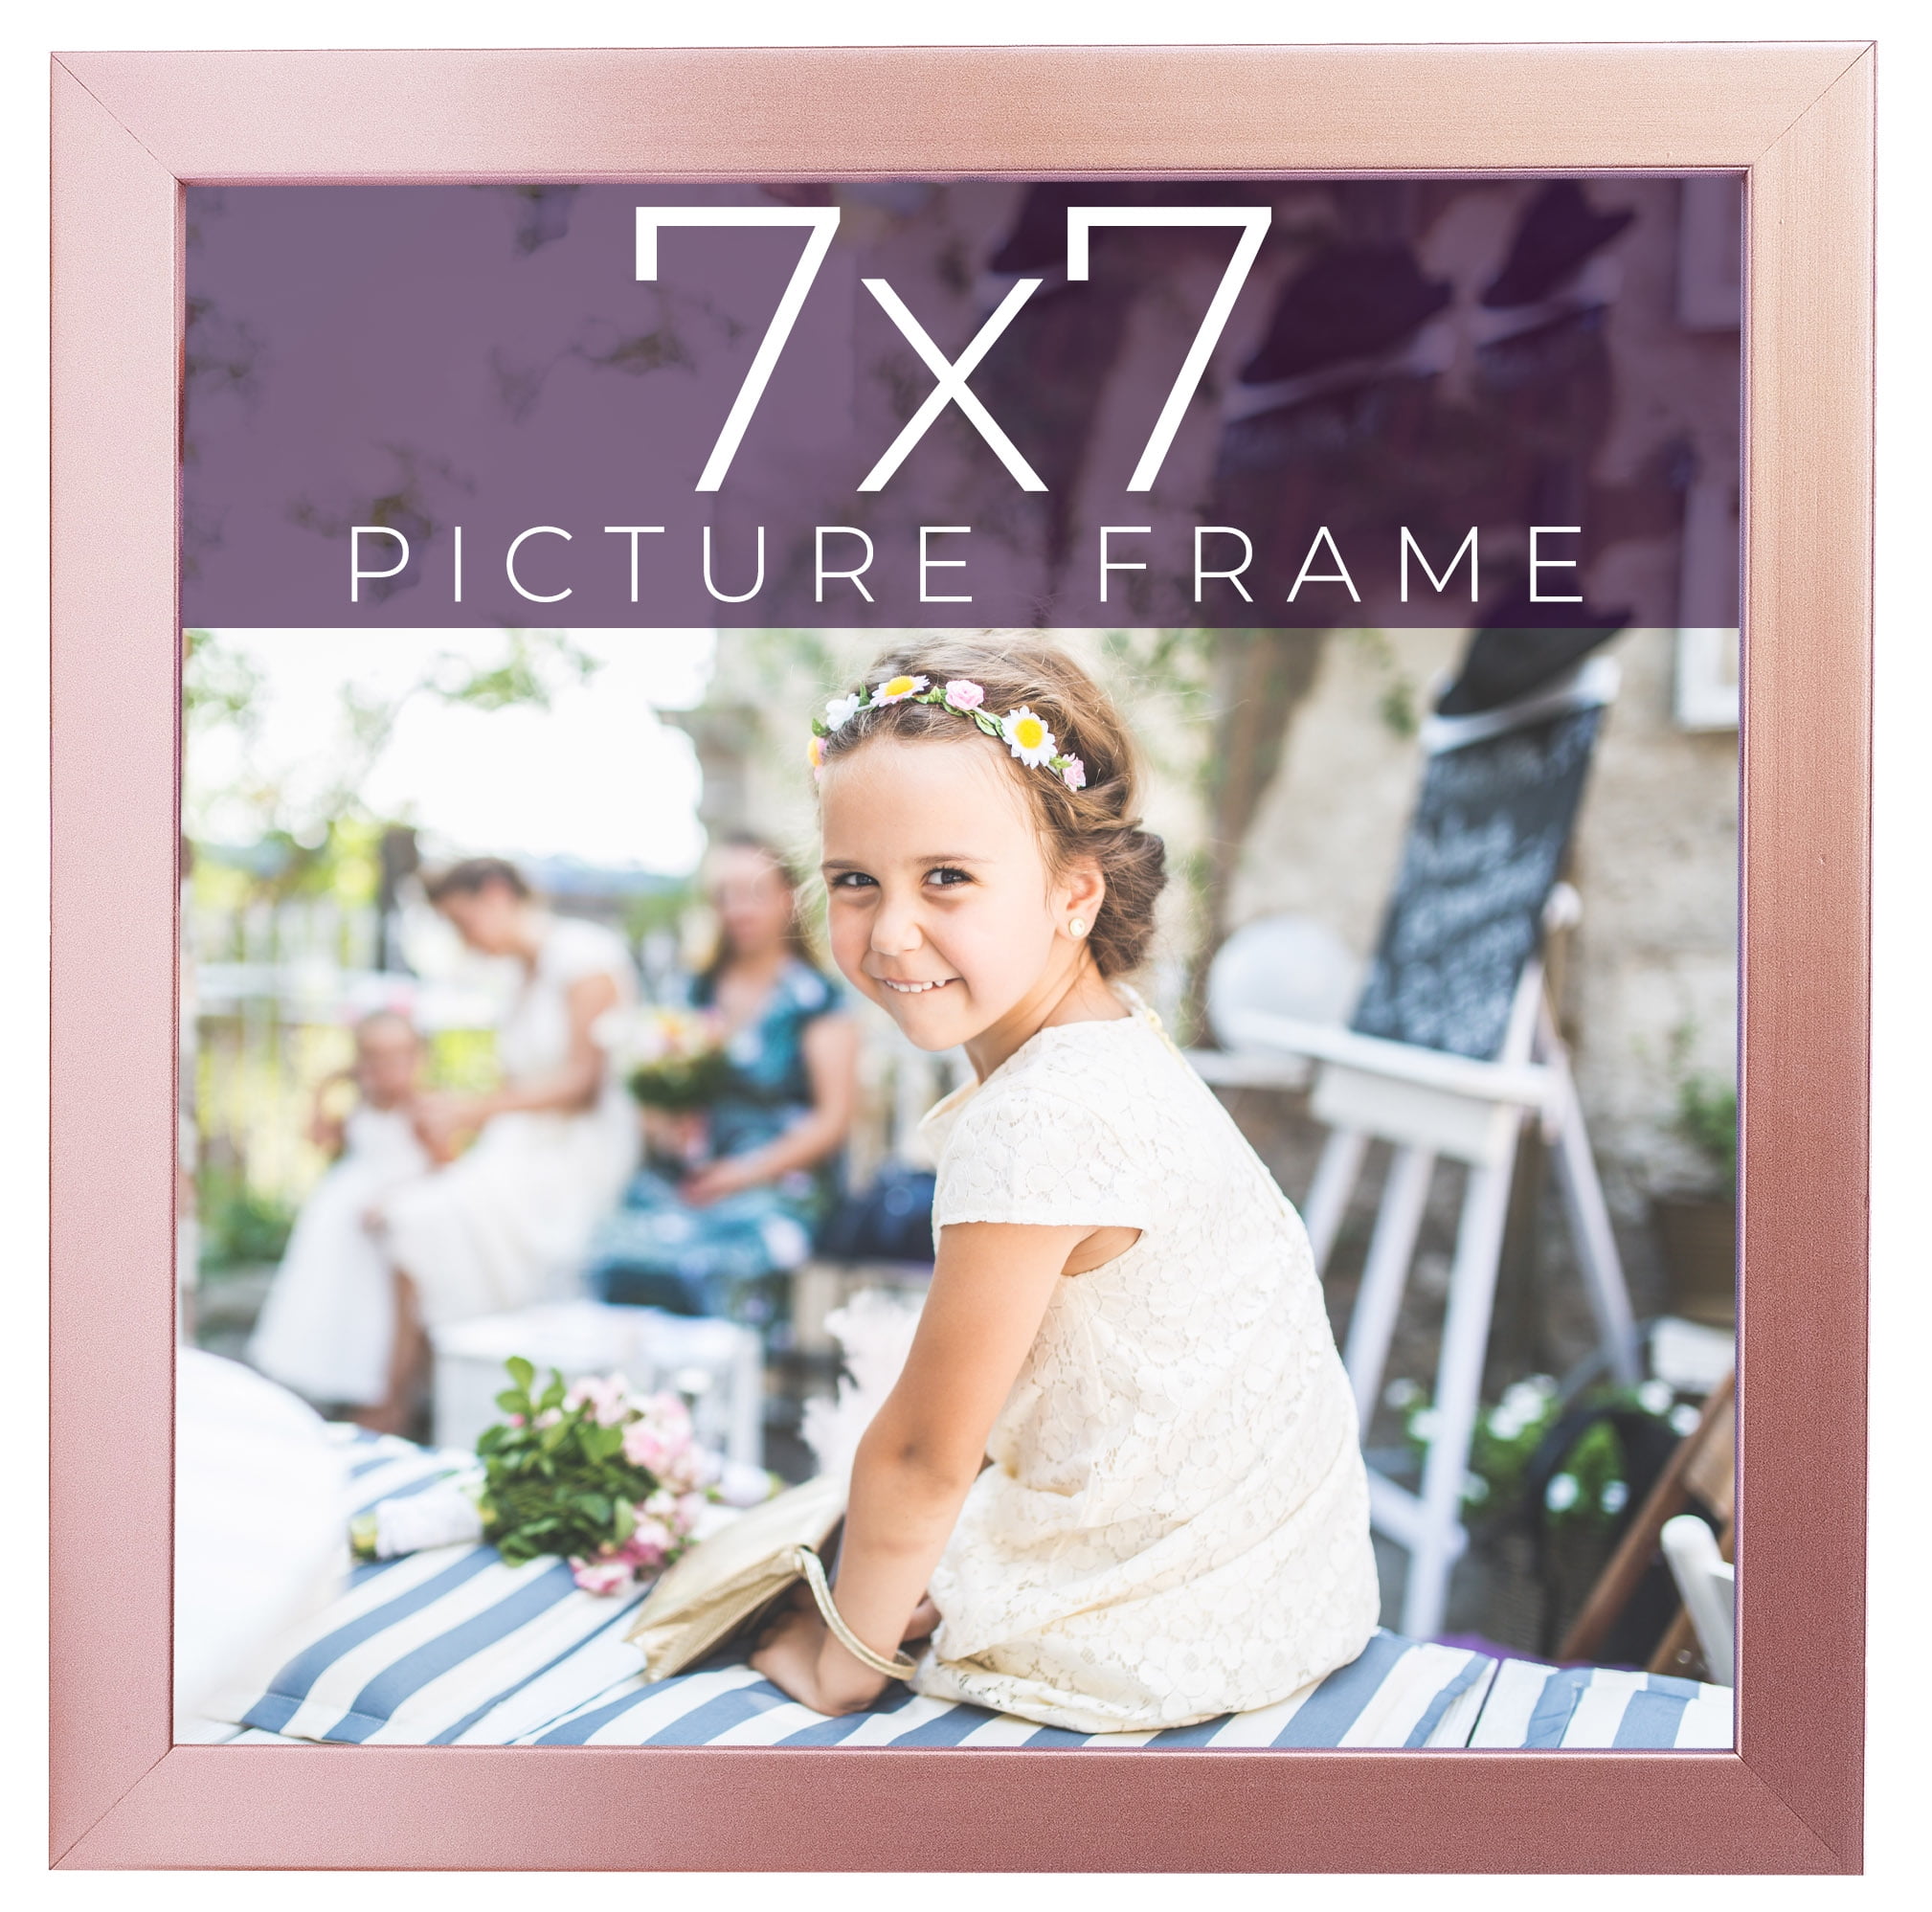 6x10 Frame Light Pine Wood Picture Frame with UV Acrylic, Foam Board Backing, & Photo Frame Wall Hanging Hardware - White